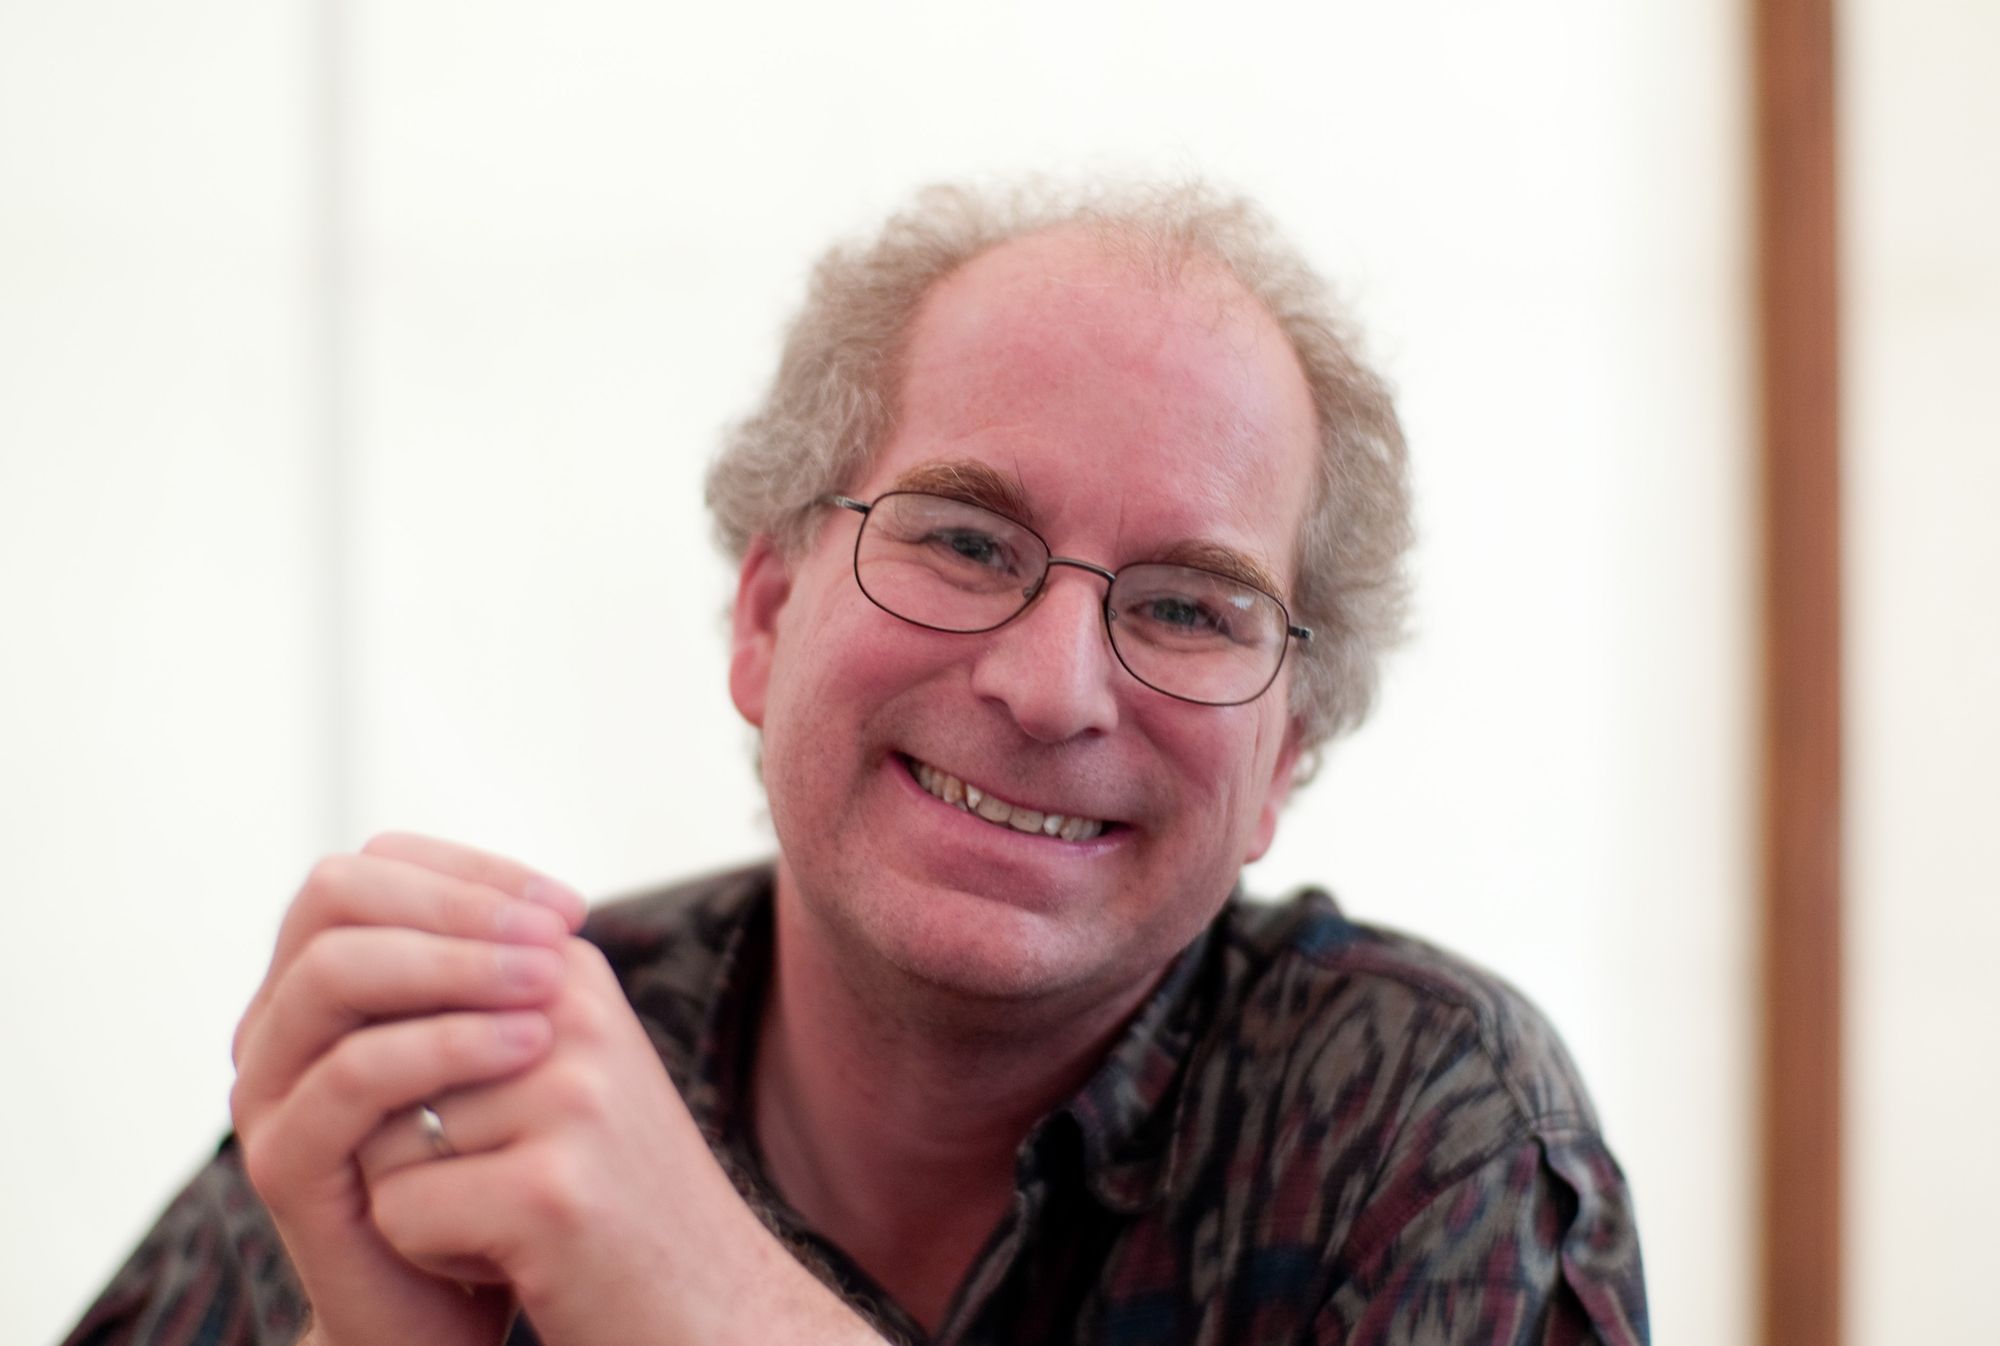 A smiling Brewster Kahle.